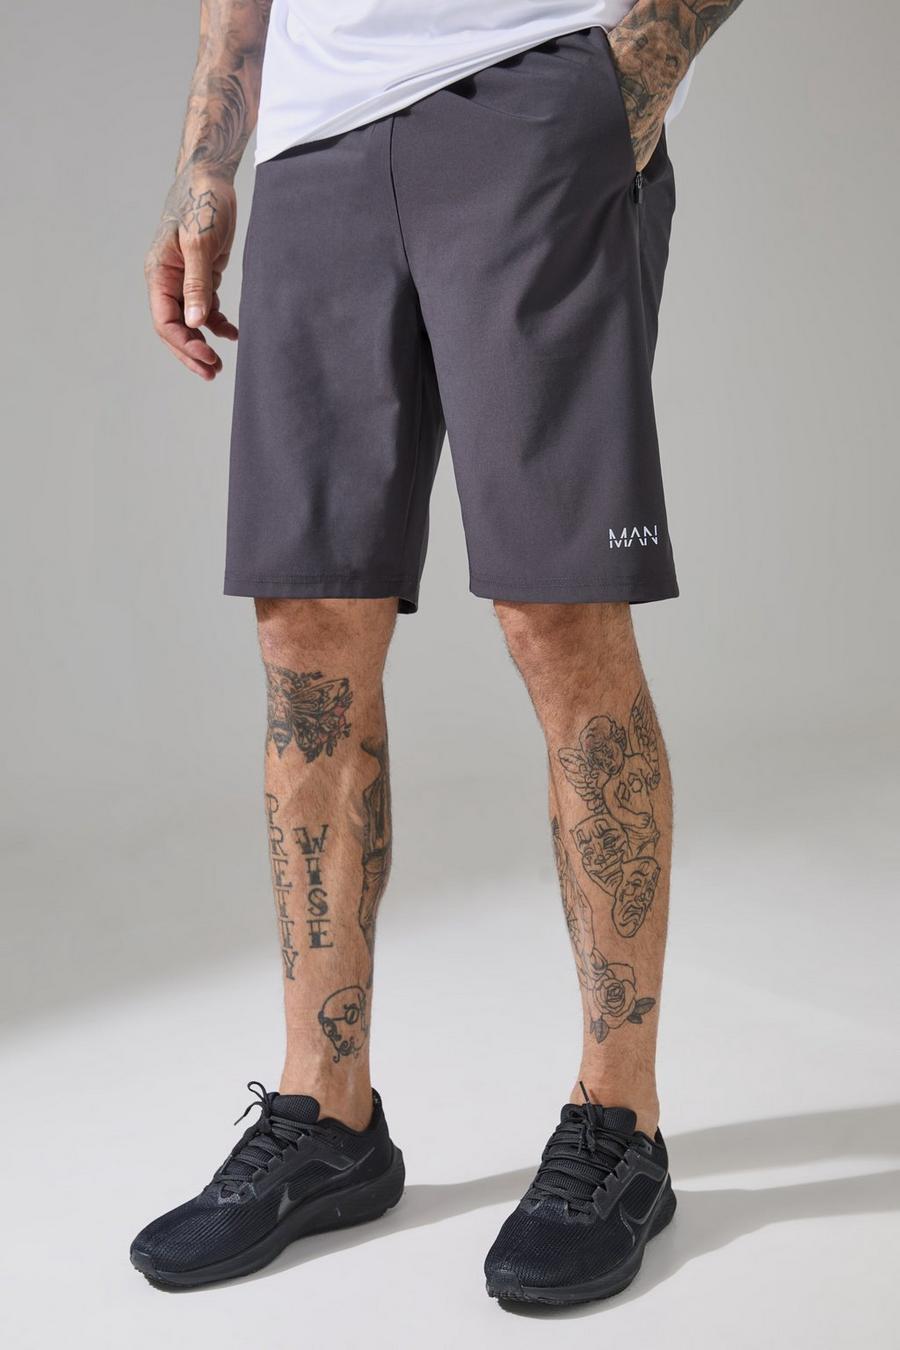 Charcoal Tall Man Active Gym 9inch Shorts With Zip Pockets